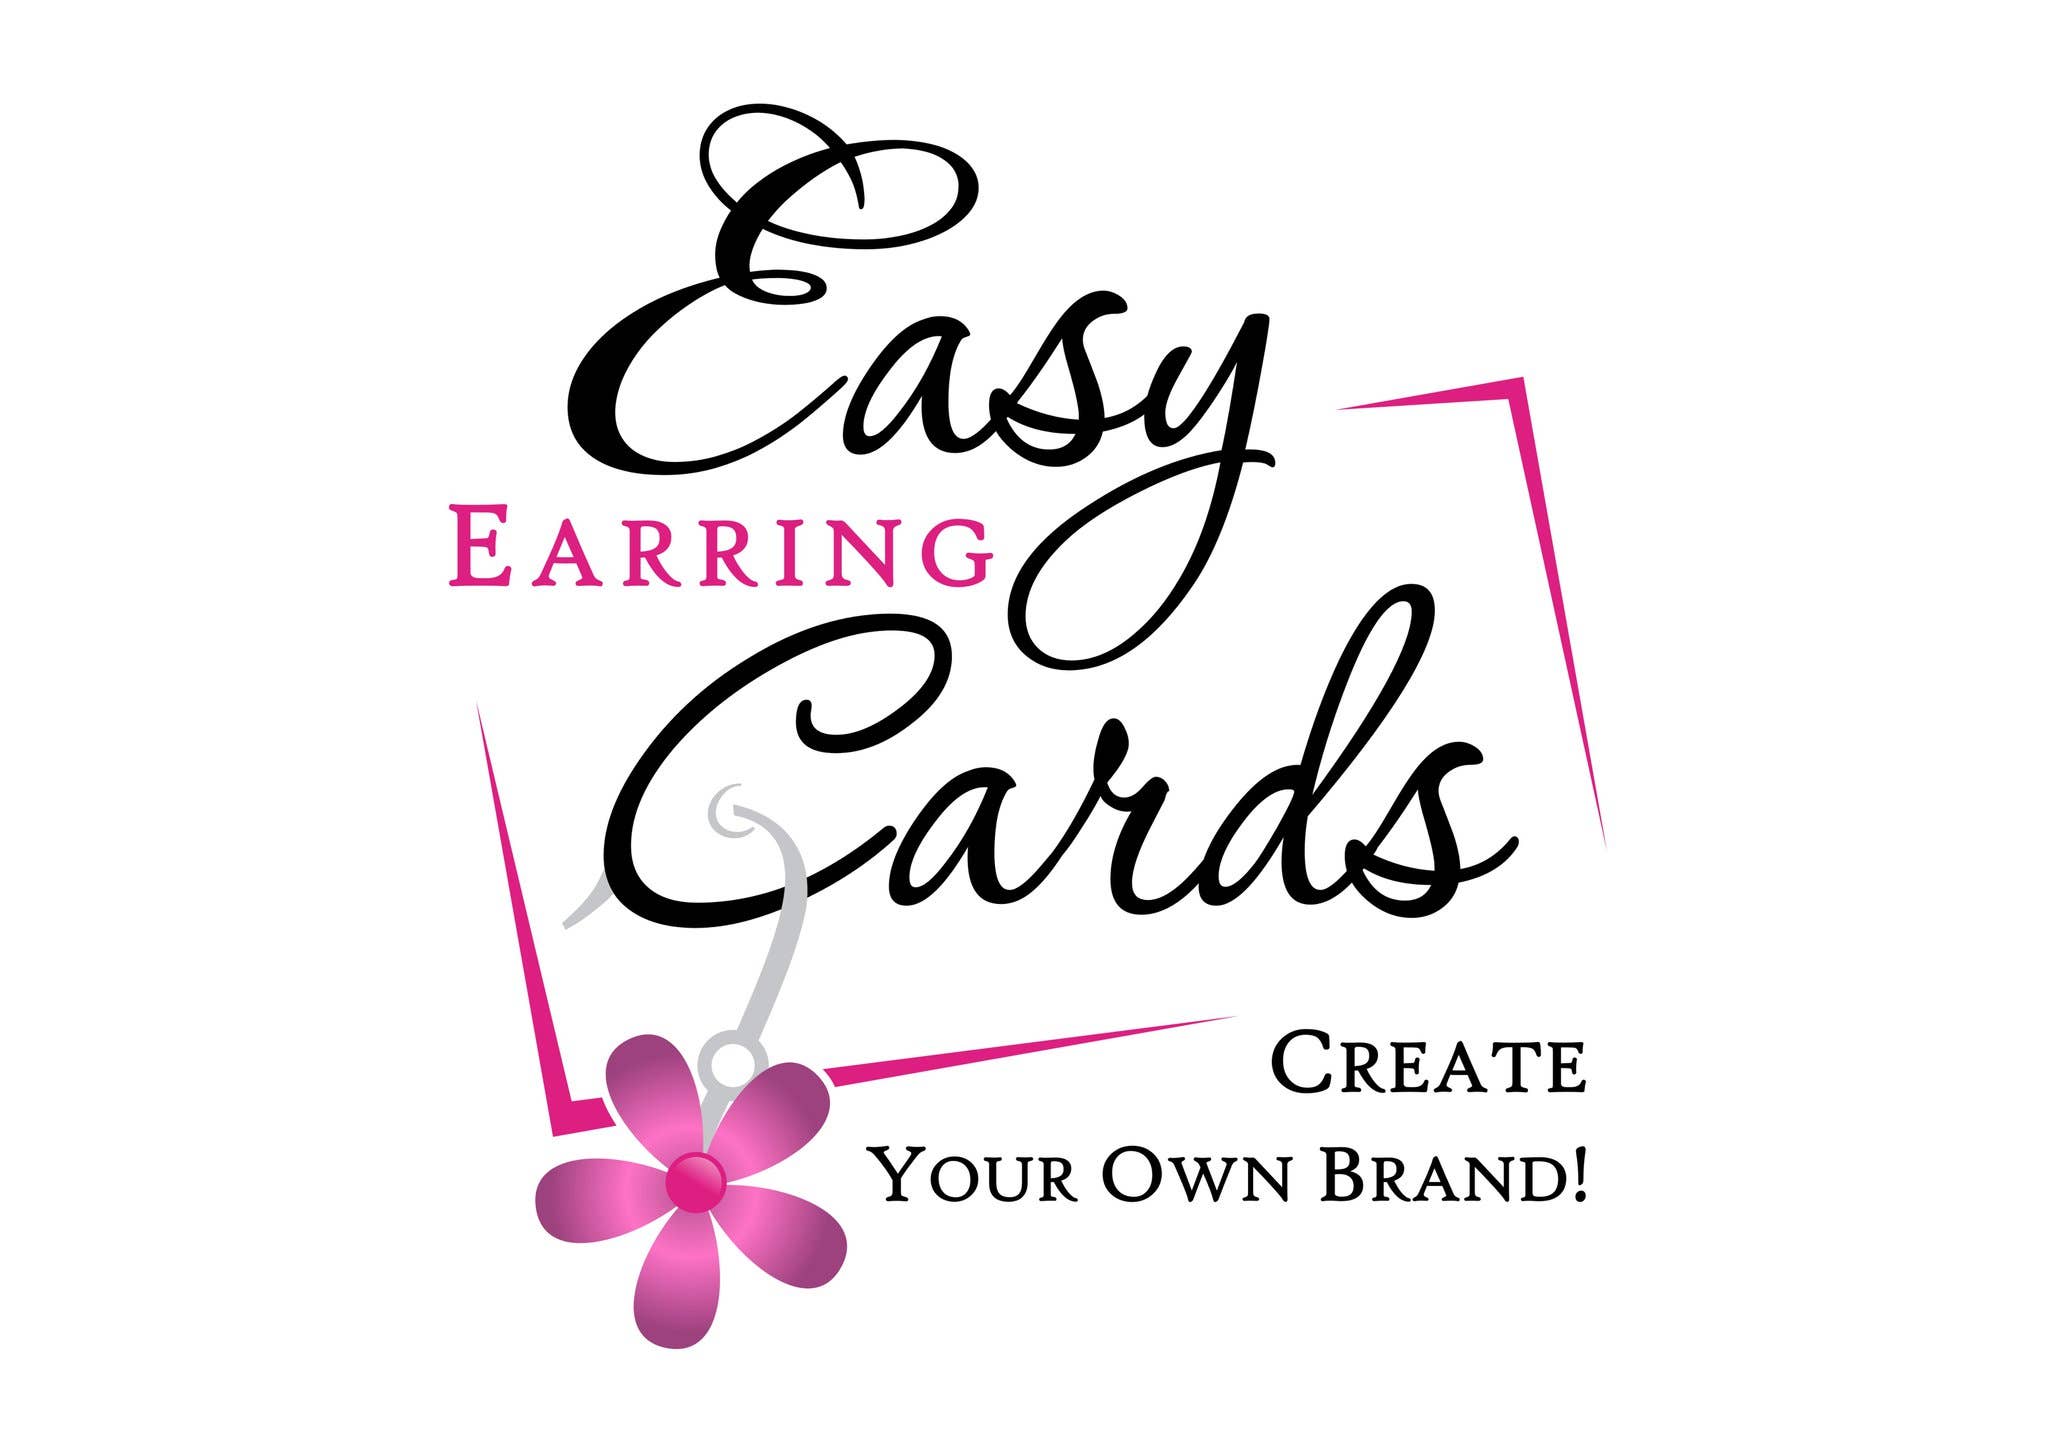 Make Your Own Jewelry Display Cards with Easy Cards by Packasmile 